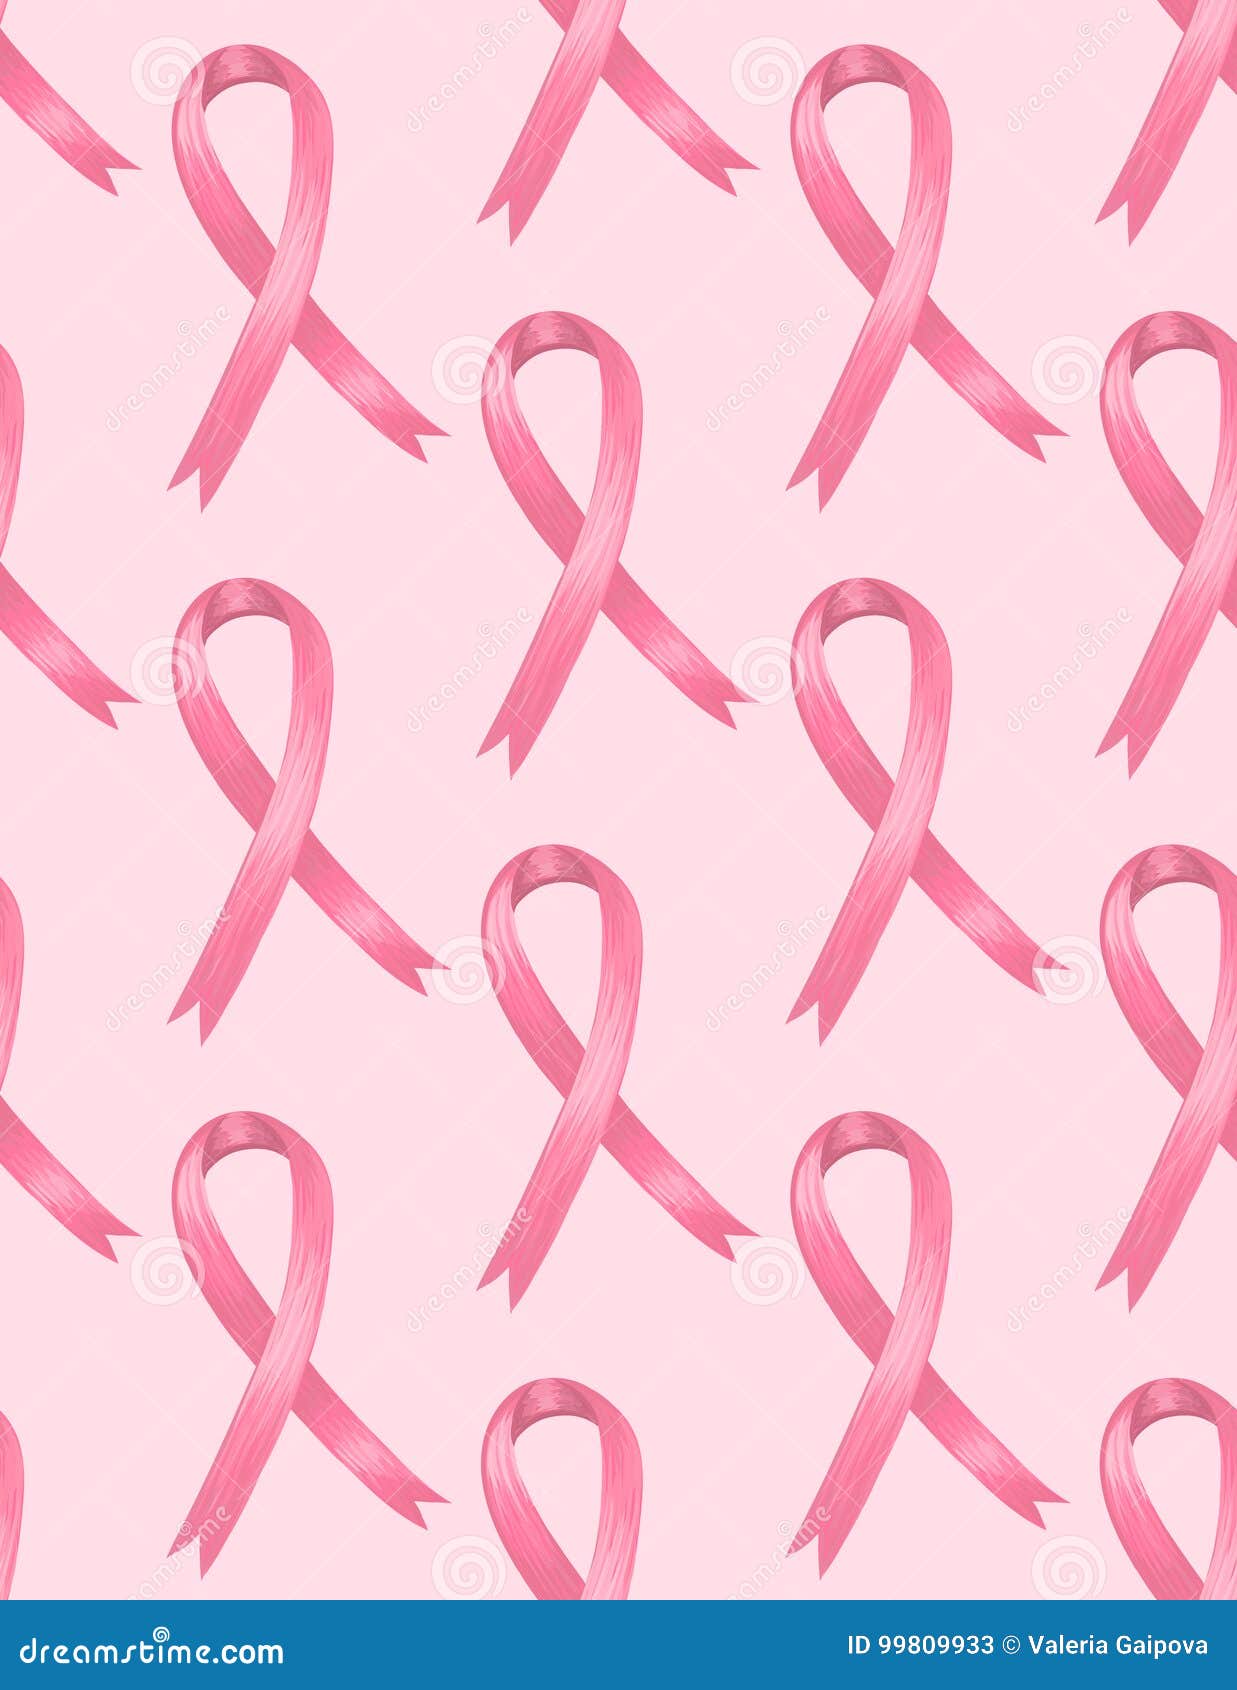 Cancer Awareness Background Images HD Pictures and Wallpaper For Free  Download  Pngtree